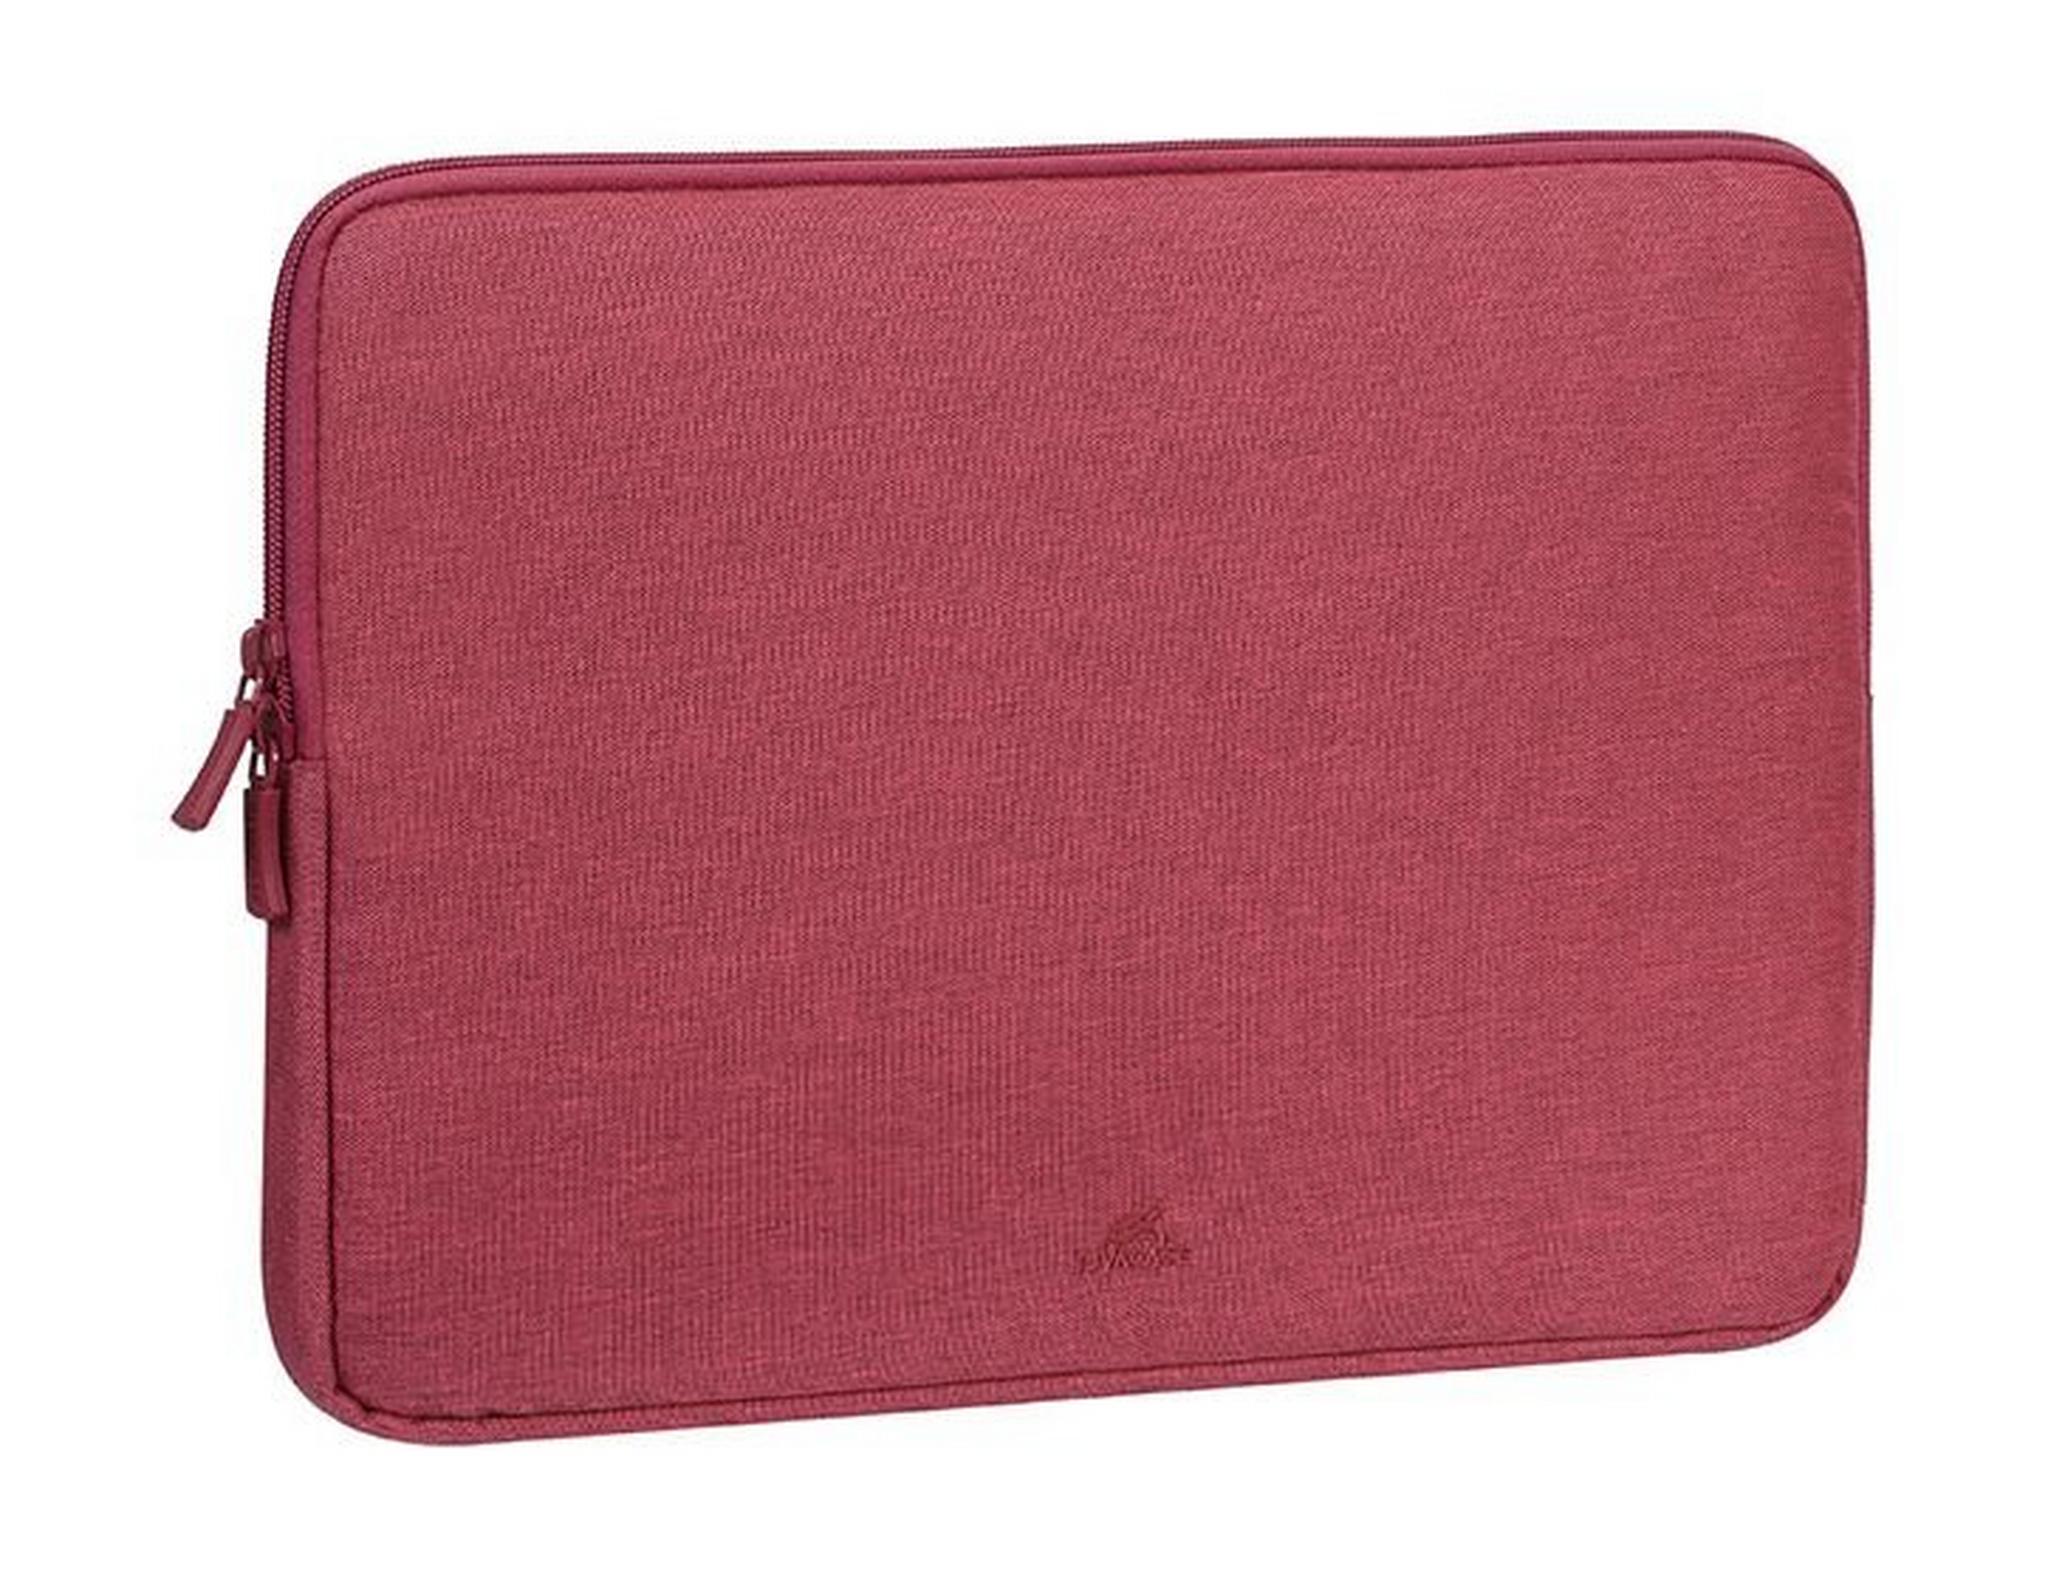 Riva Sleeve For 13.3-inch Laptop (7703) - Red